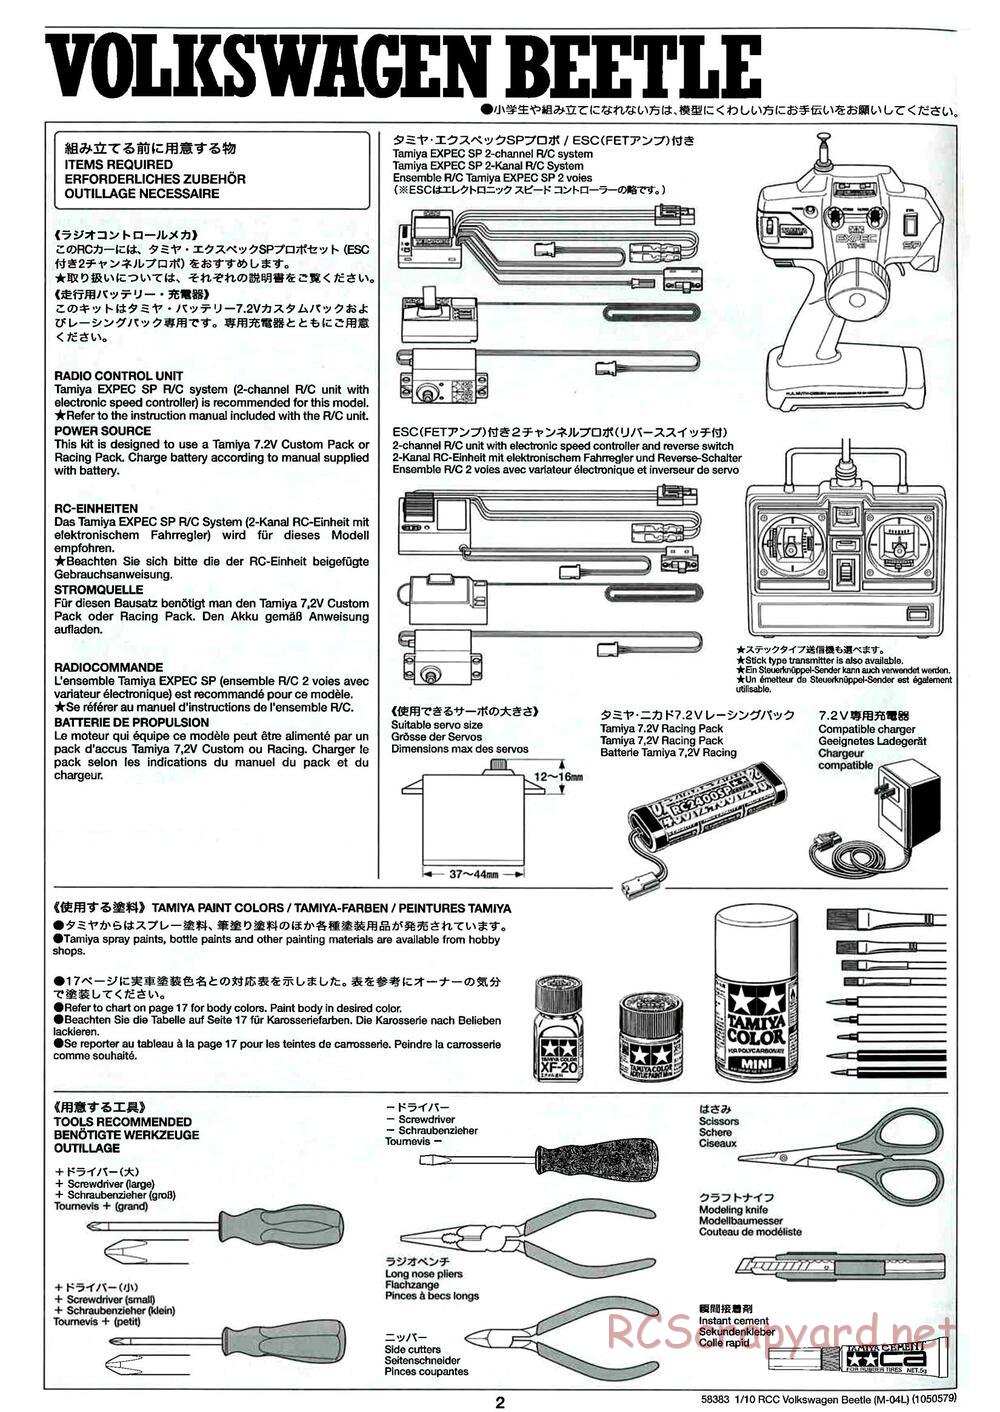 Tamiya - Volkswagen Beetle - M04L Chassis - Manual - Page 2